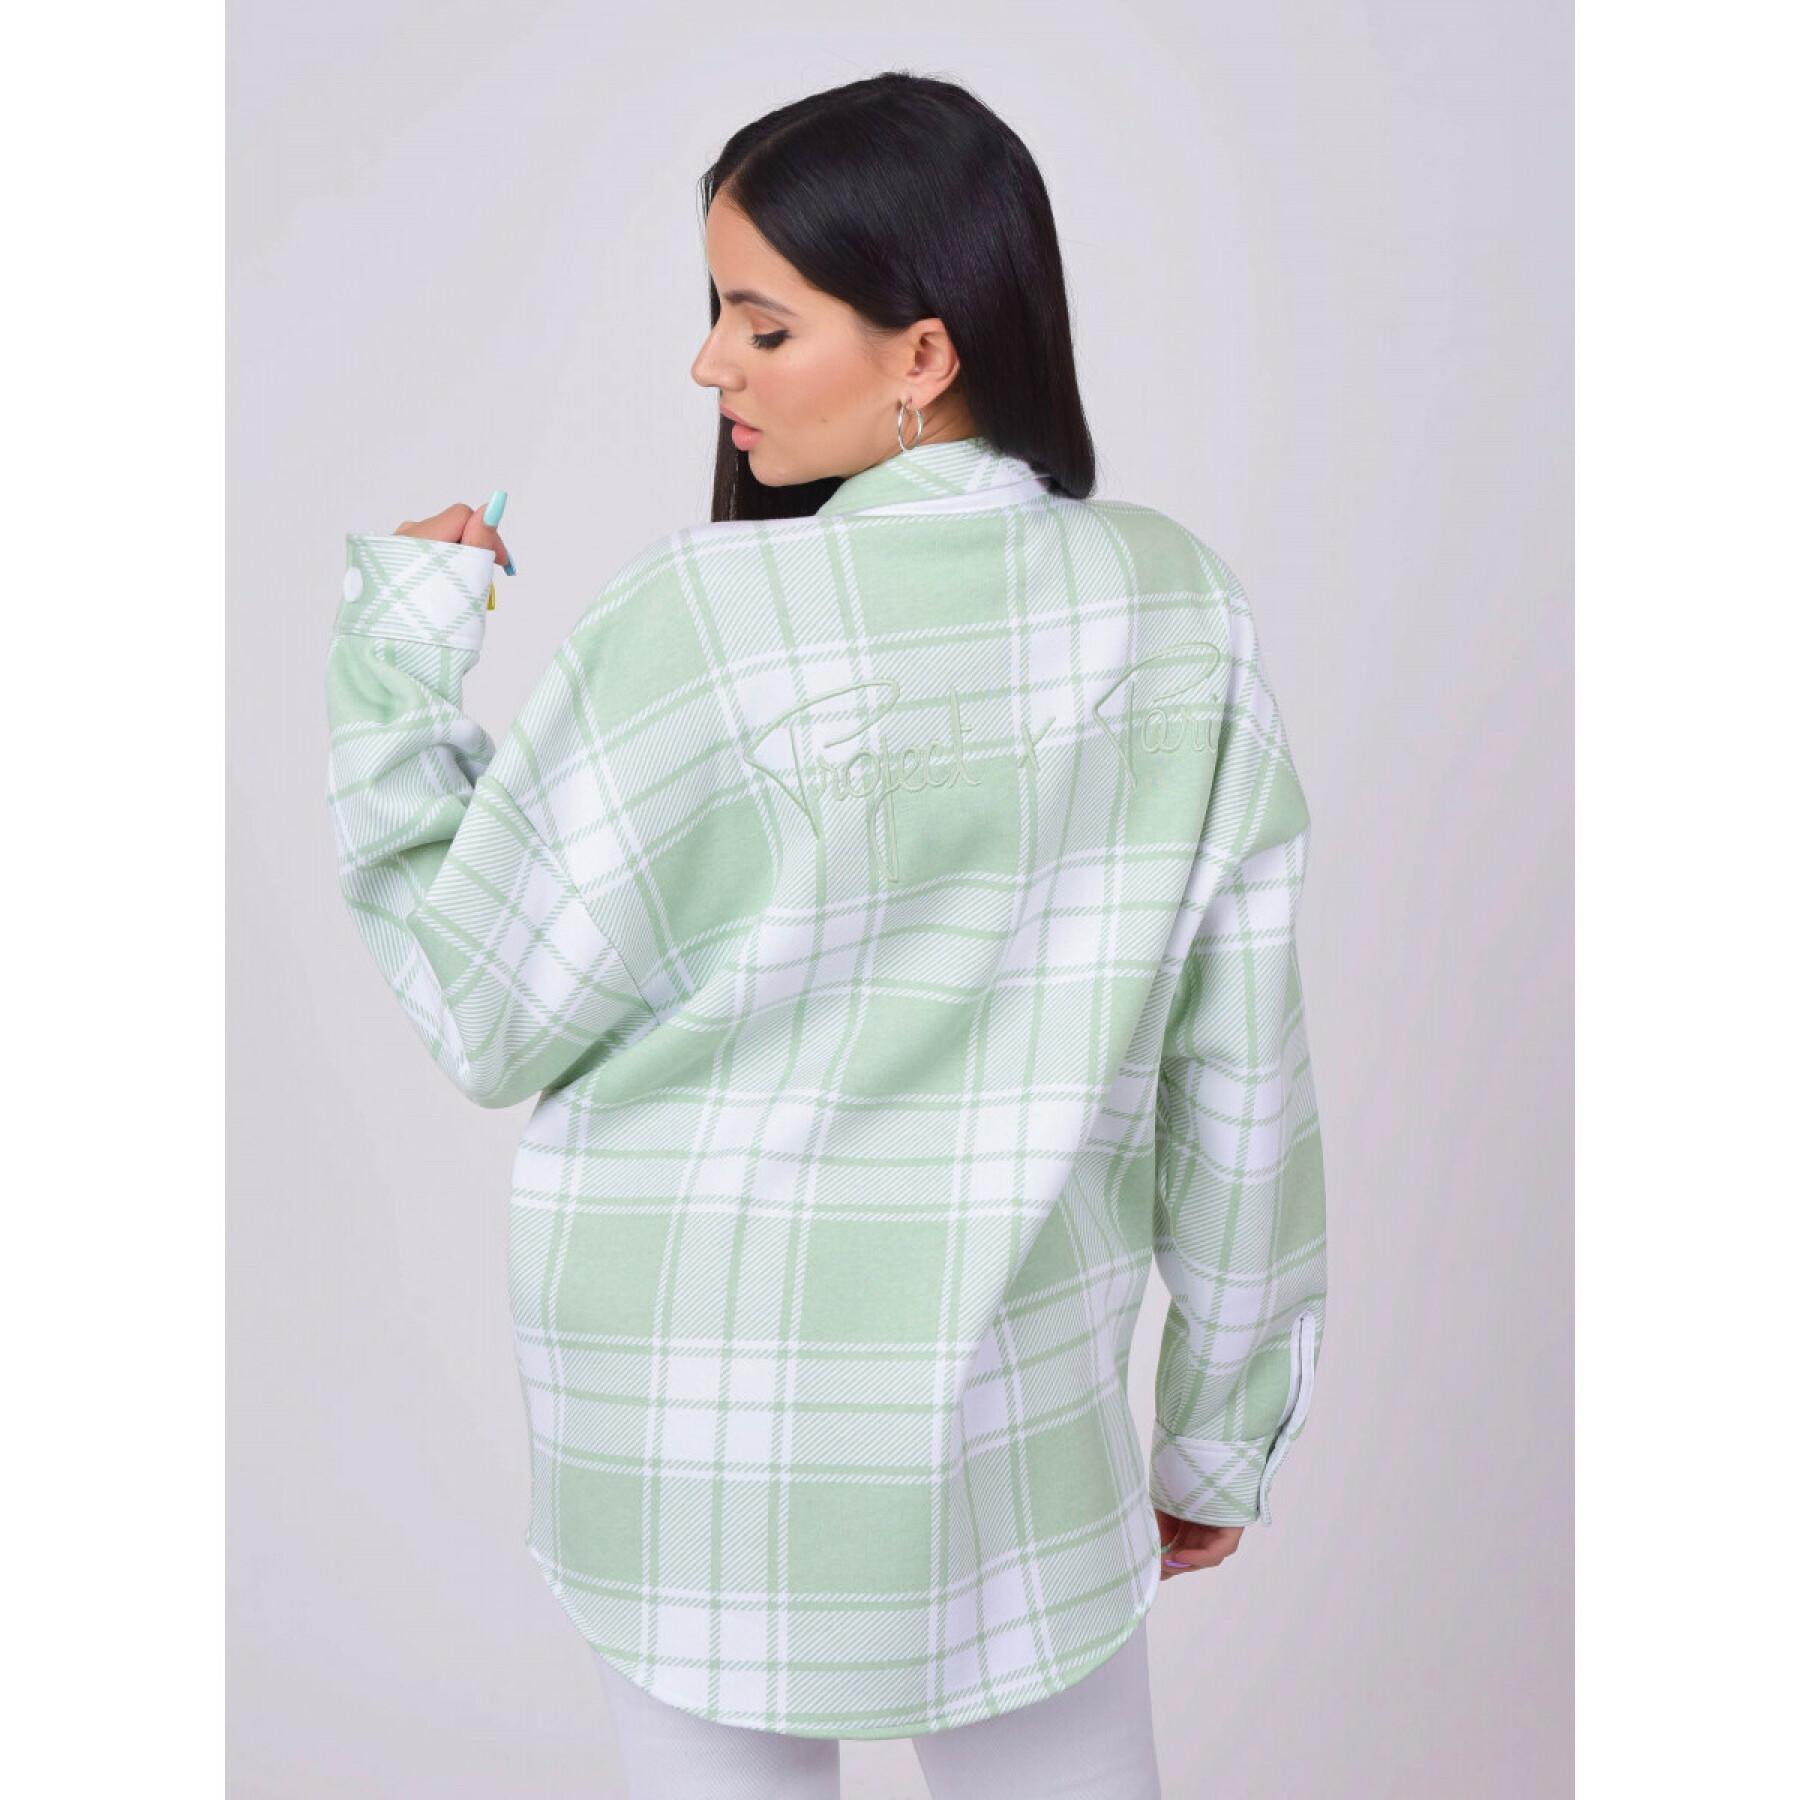 Women's two-tone checkered overshirt Project X Paris